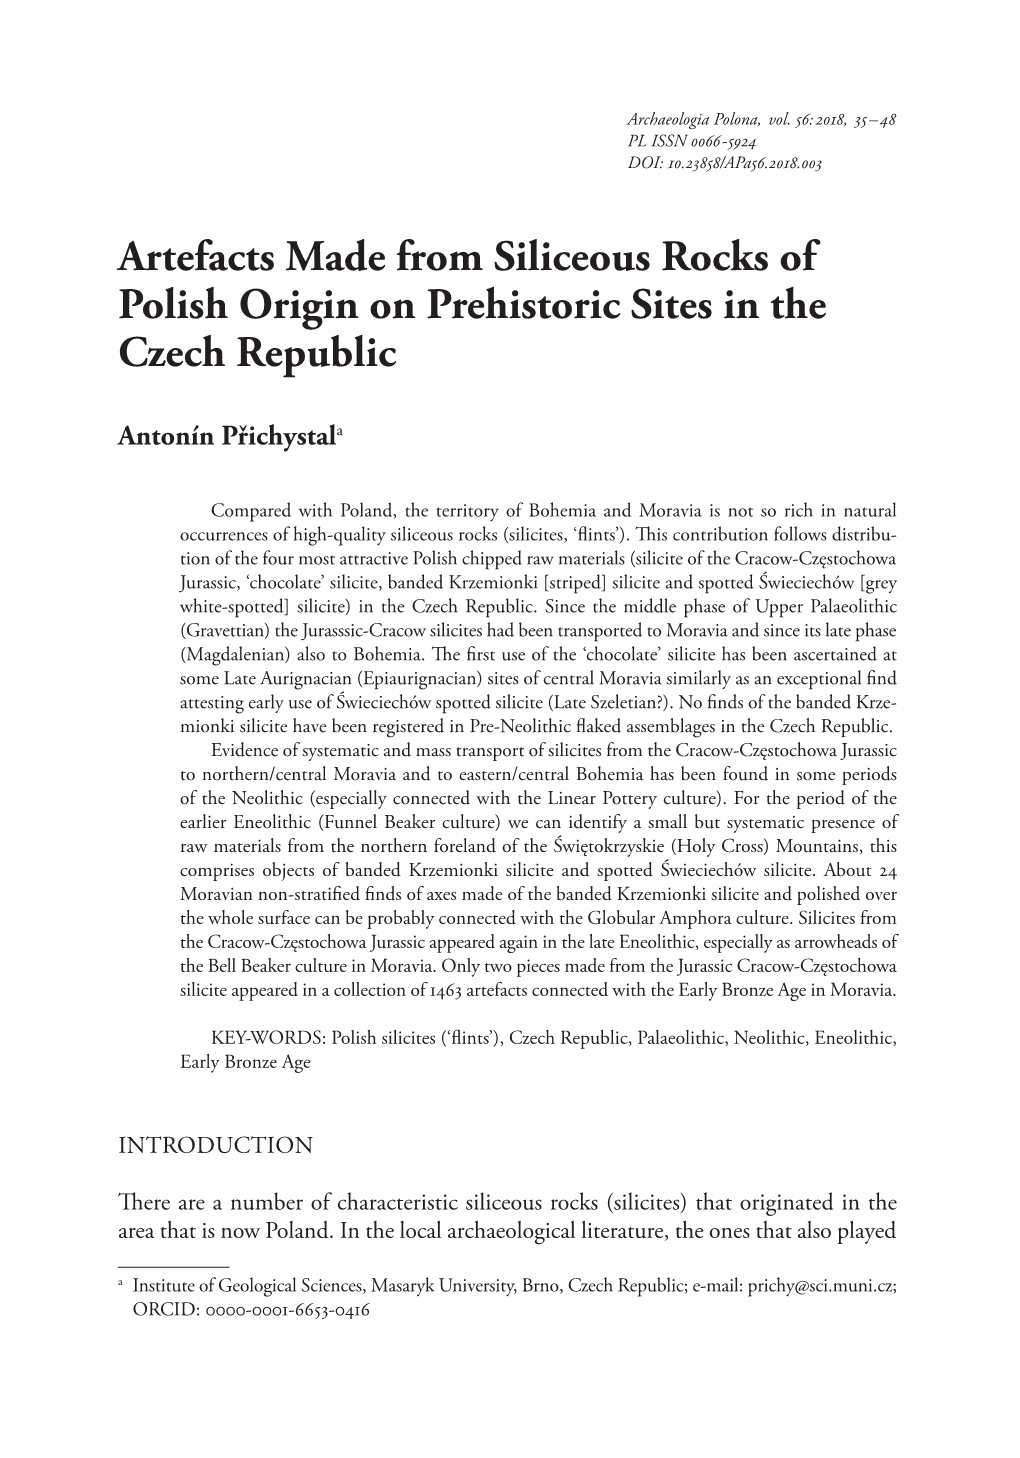 Artefacts Made from Siliceous Rocks of Polish Origin on Prehistoric Sites in the Czech Republic